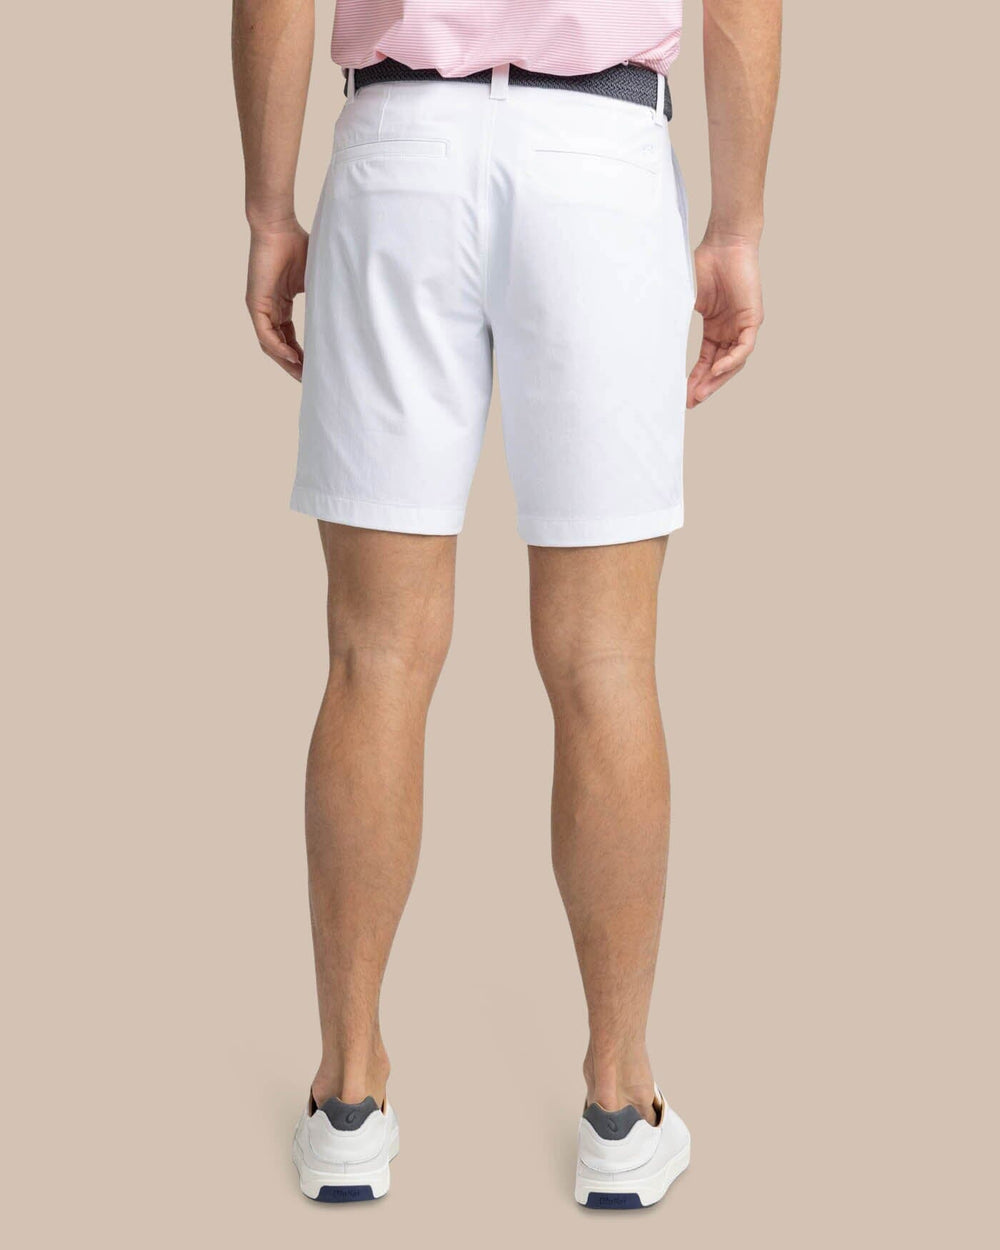 The back view of the Southern Tide gulf 8 inch brrr die performance short by Southern Tide - Classic White